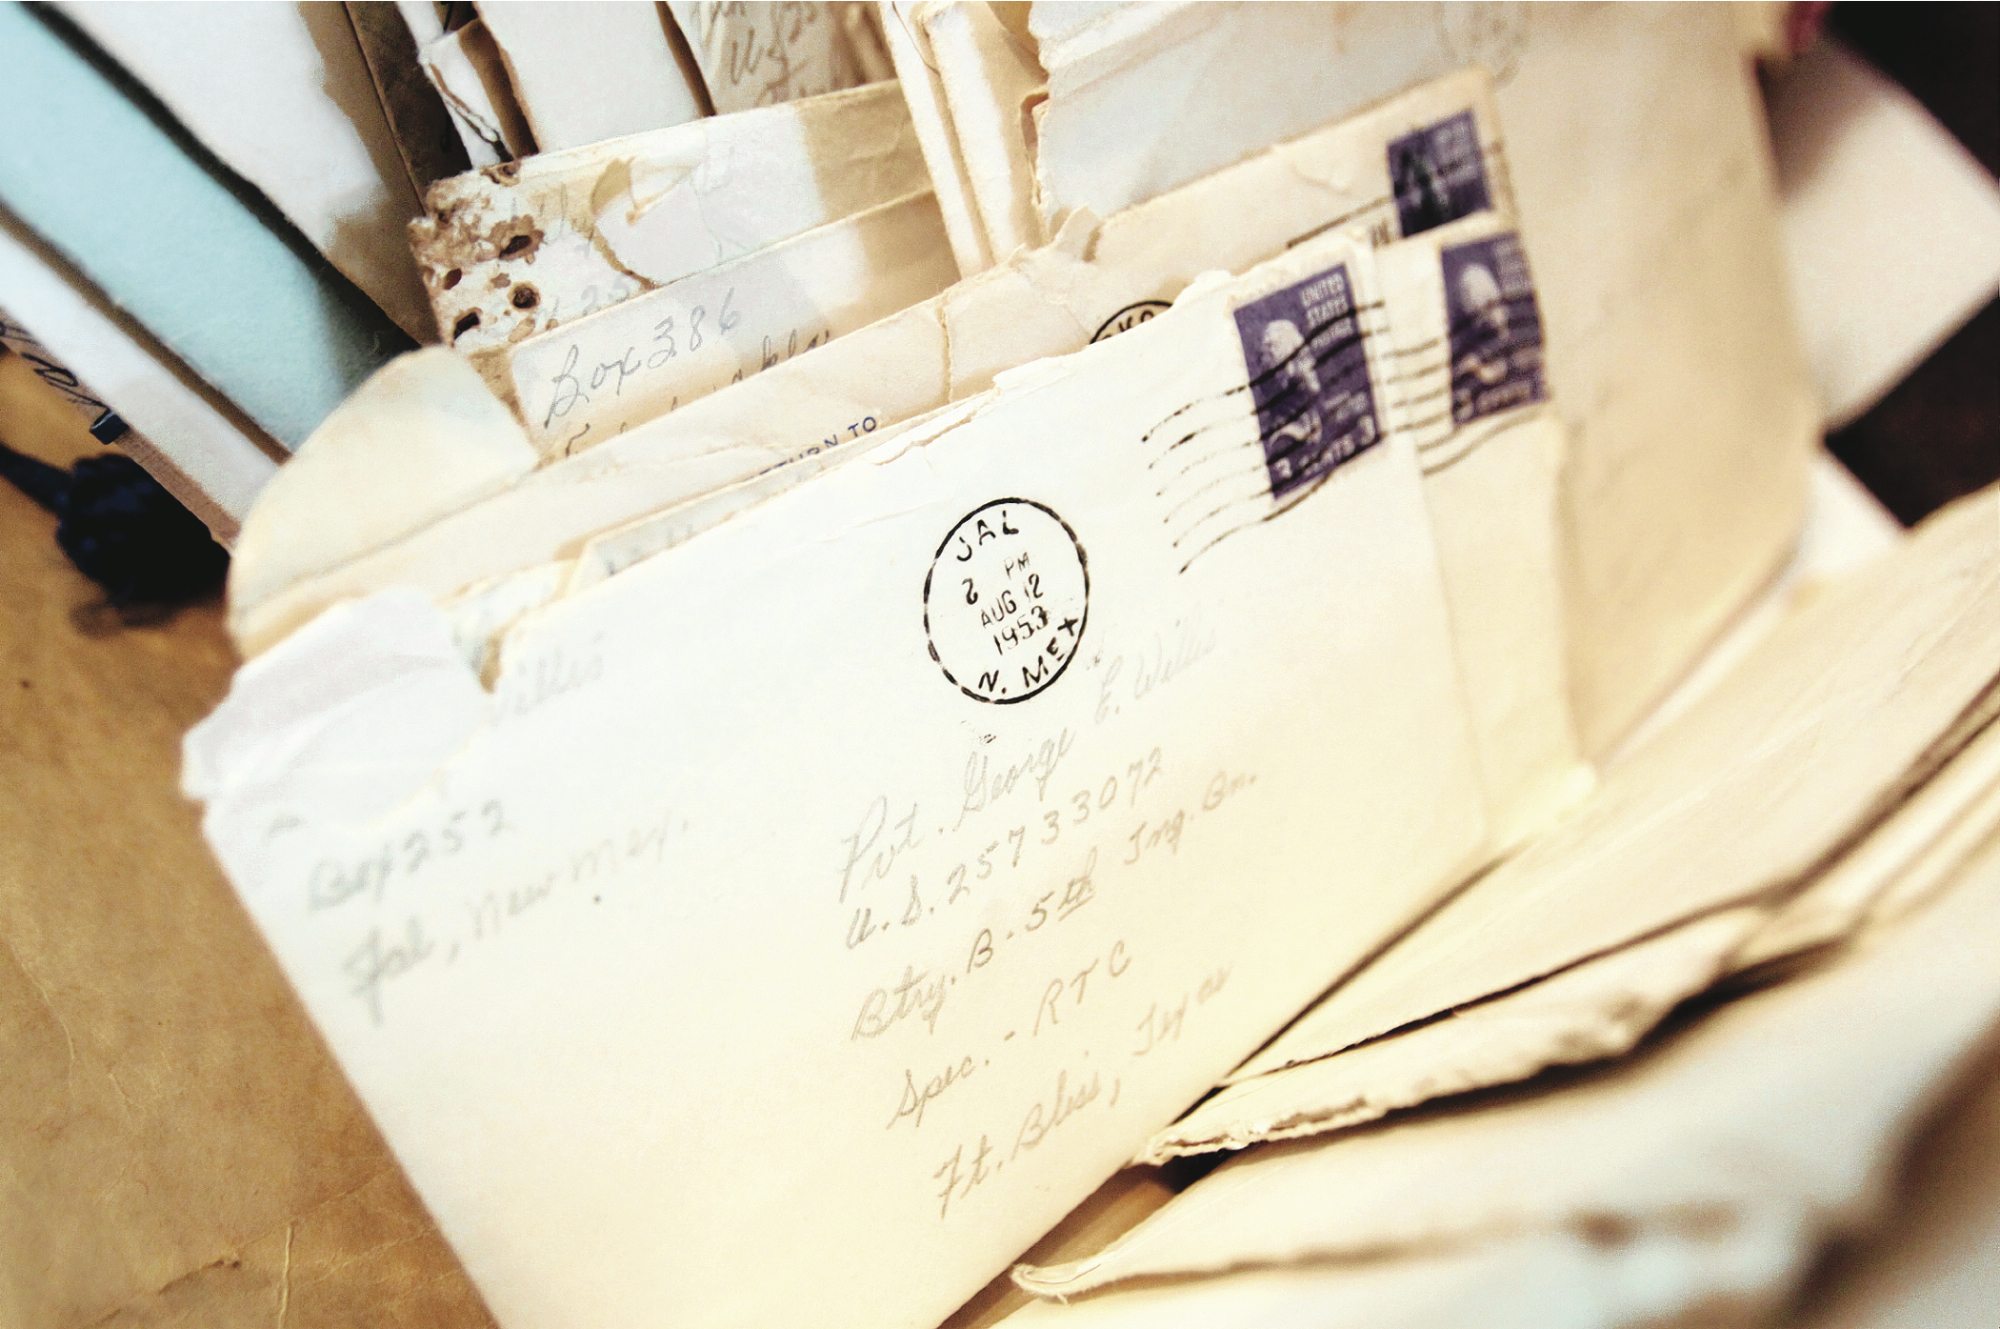 Old love letters written between Shirley Willis and her husband while he was in boot camp in the 1950s were among the items found in an old trunk Willis lost 24 years ago.